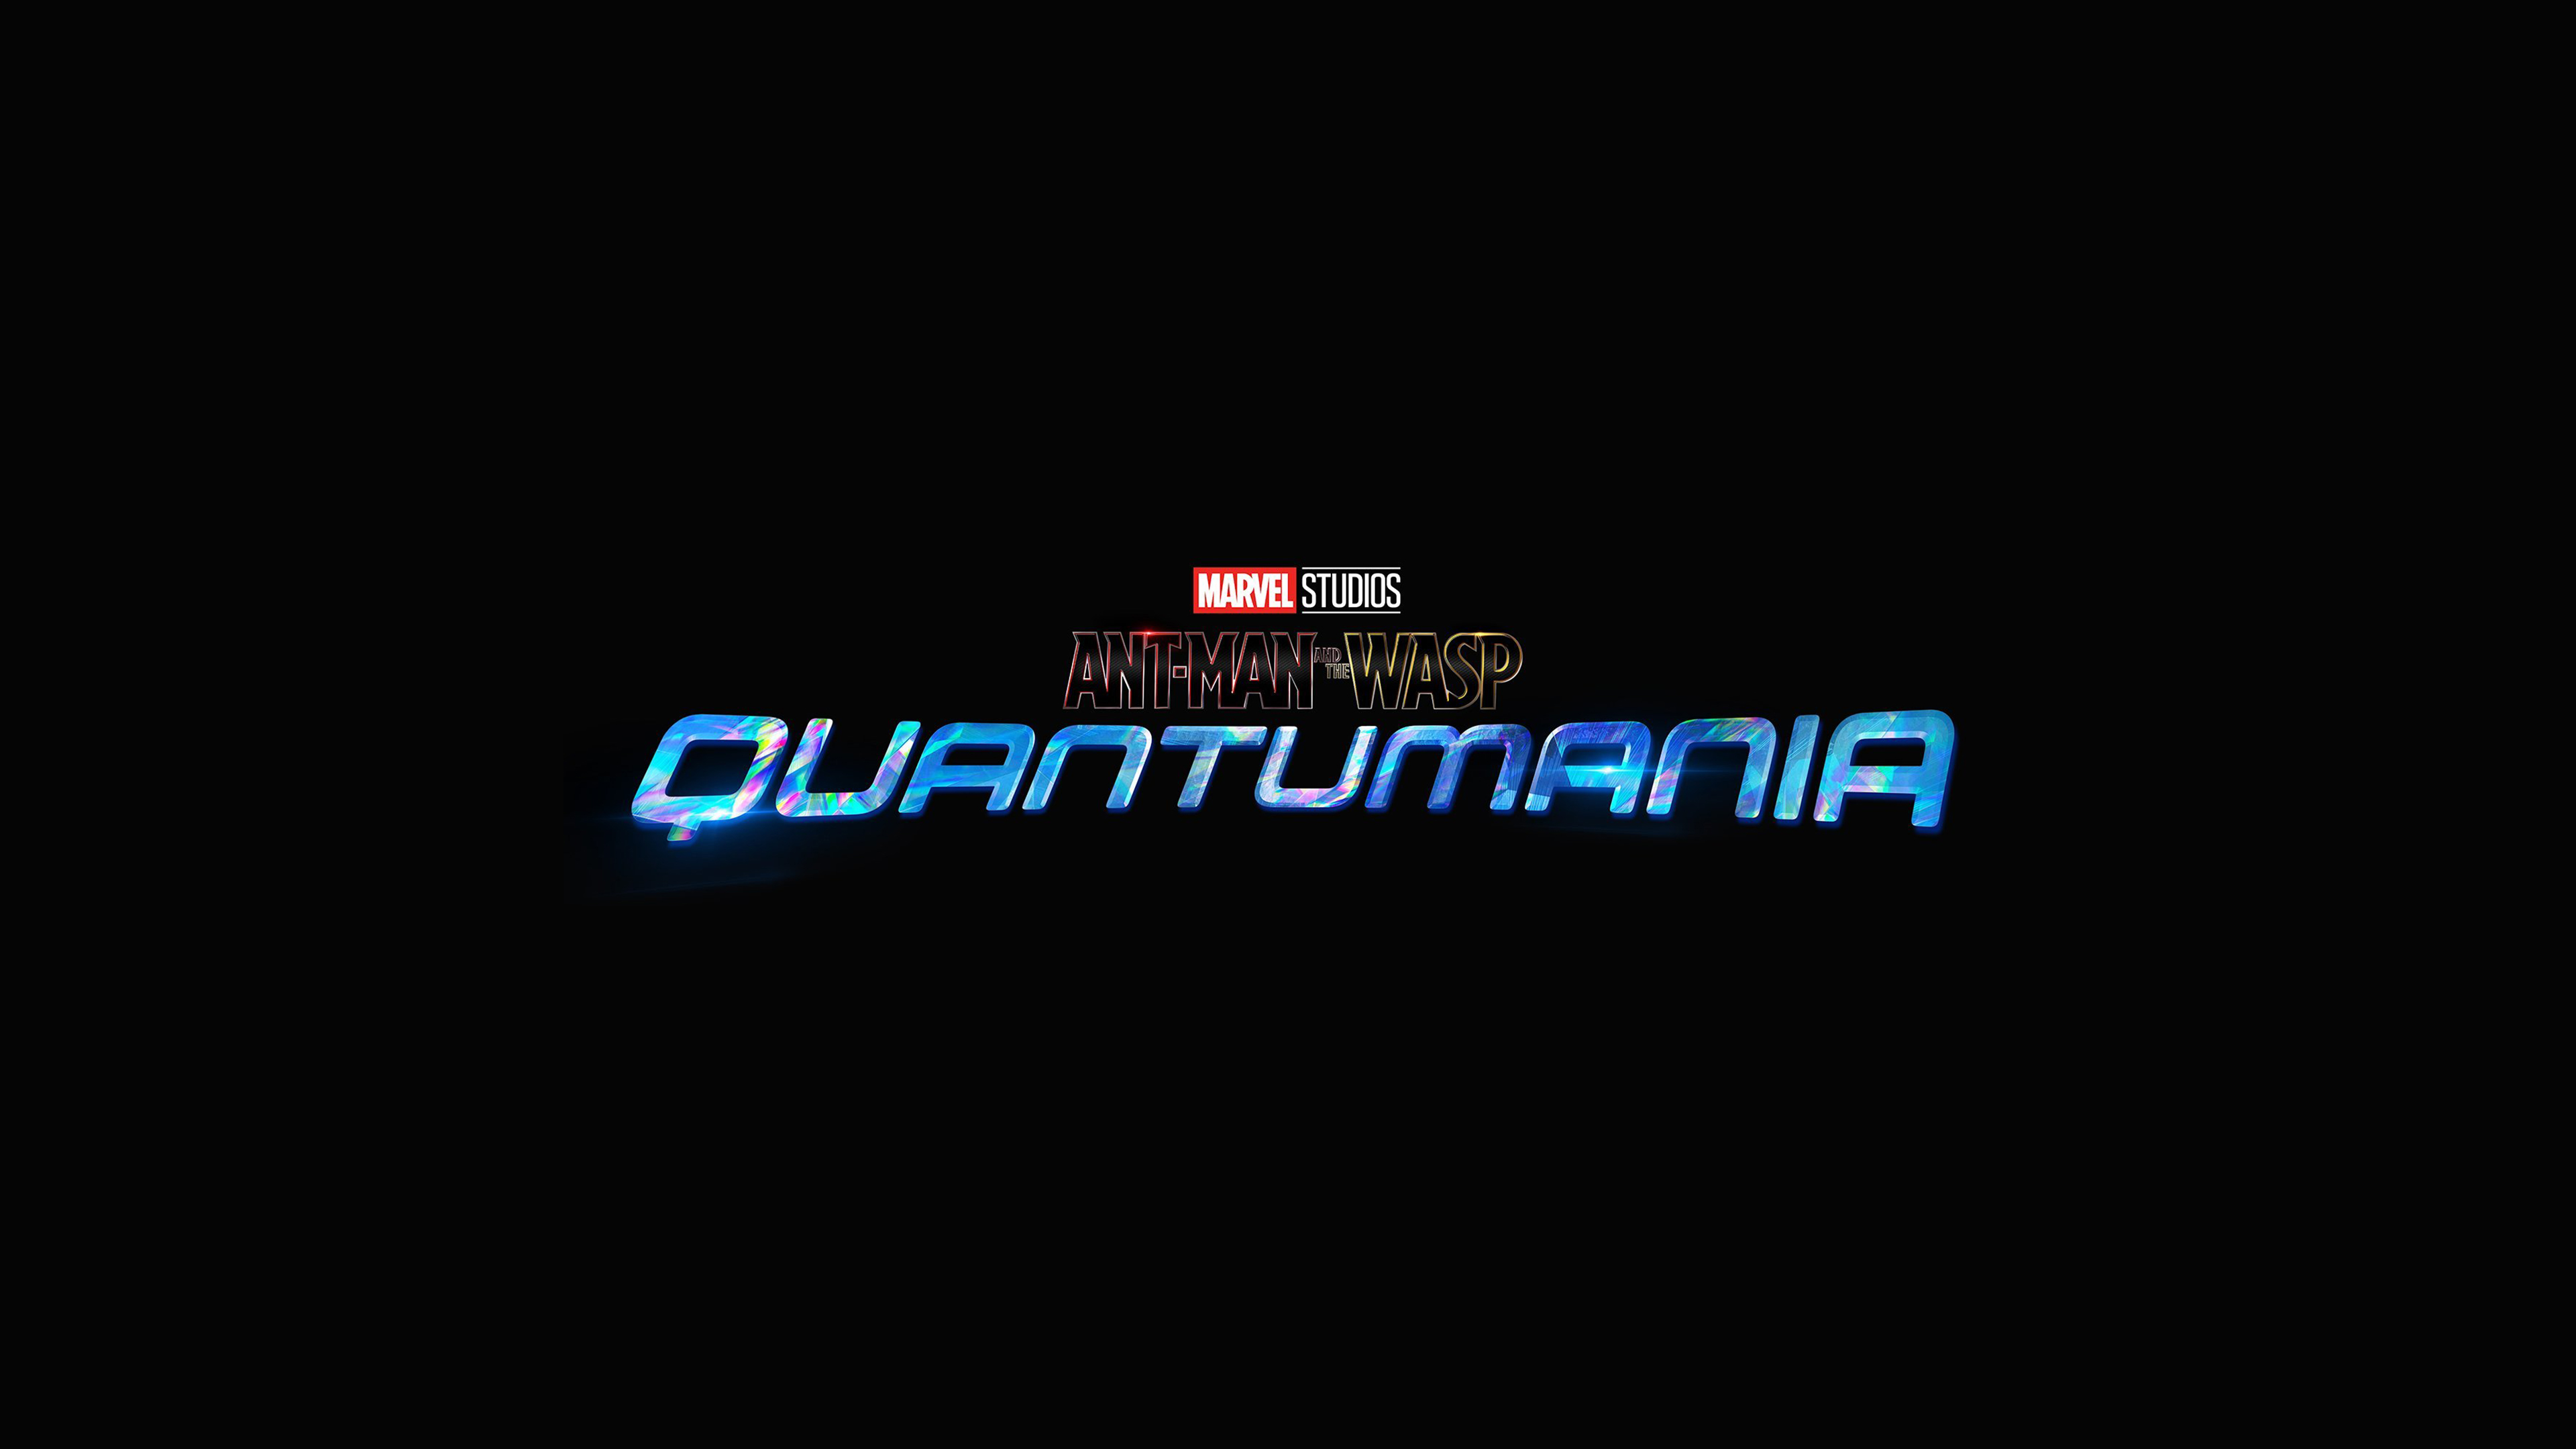 Ant Man And The Wasp: Quantumania Wallpaper 4K, 2023 Movies, Marvel Comics, Movies